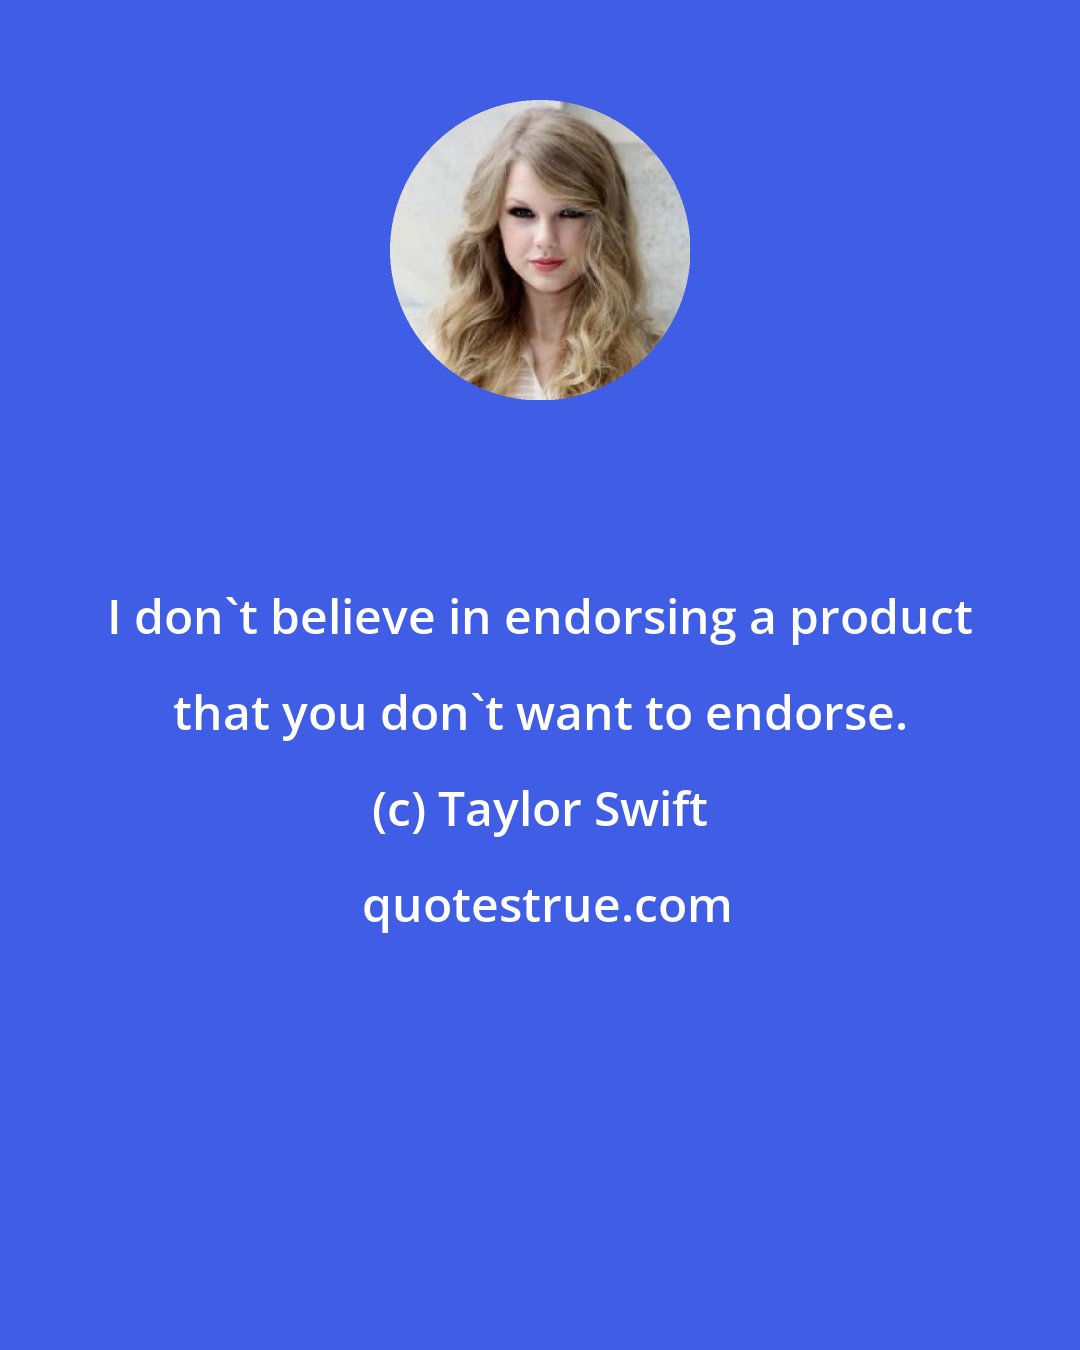 Taylor Swift: I don't believe in endorsing a product that you don't want to endorse.